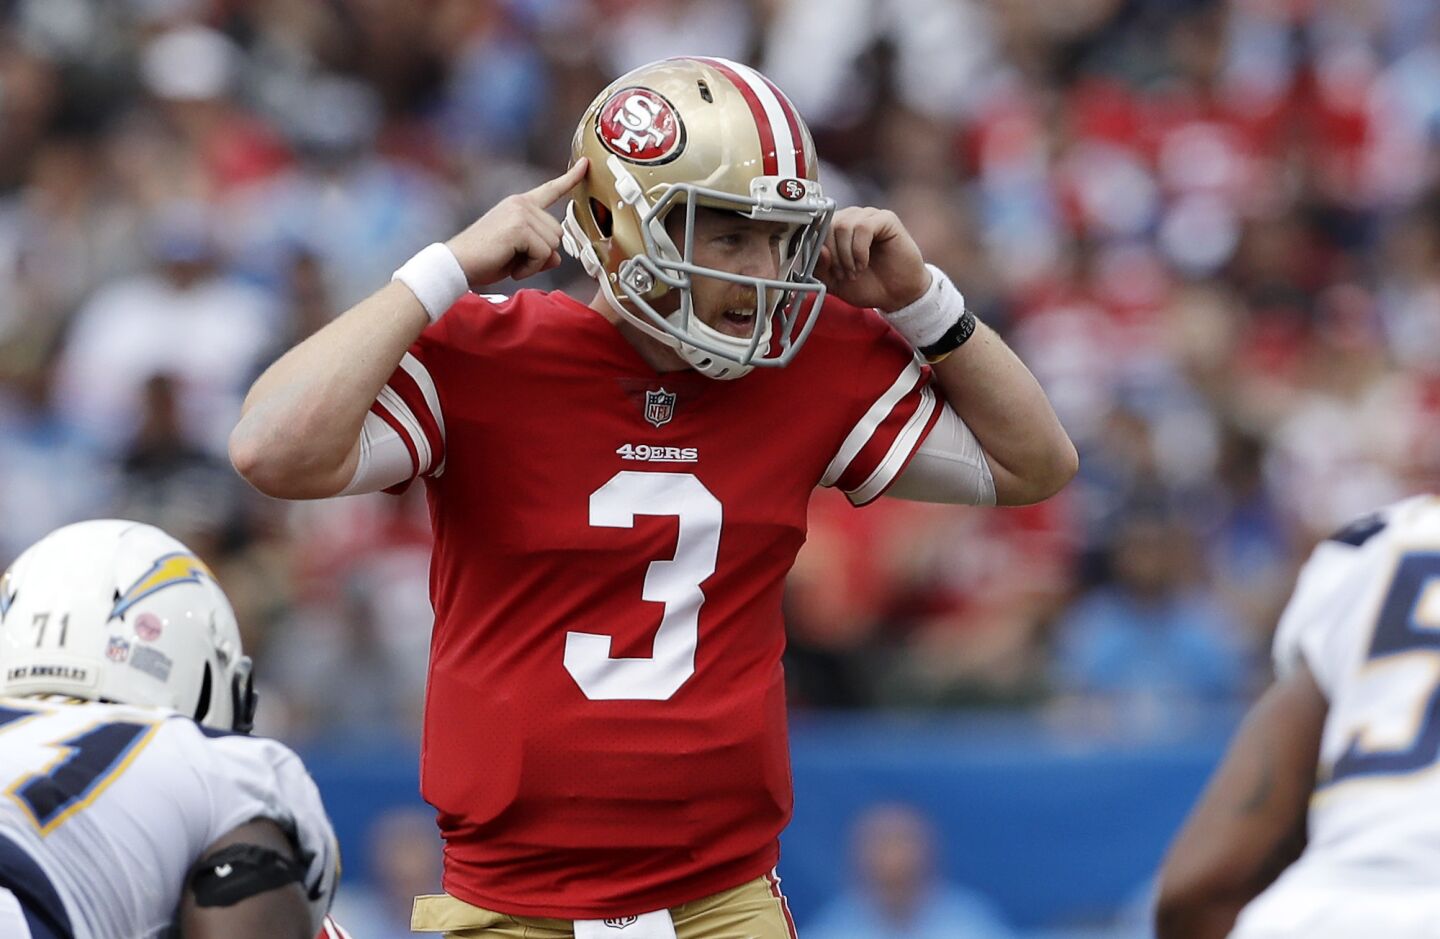 San Francisco 49ers quarterback C.J. Beathard gestures during the first half of an NFL football game against the Los Angeles Chargers, Sunday, Sept. 30, 2018, in Carson, Calif.